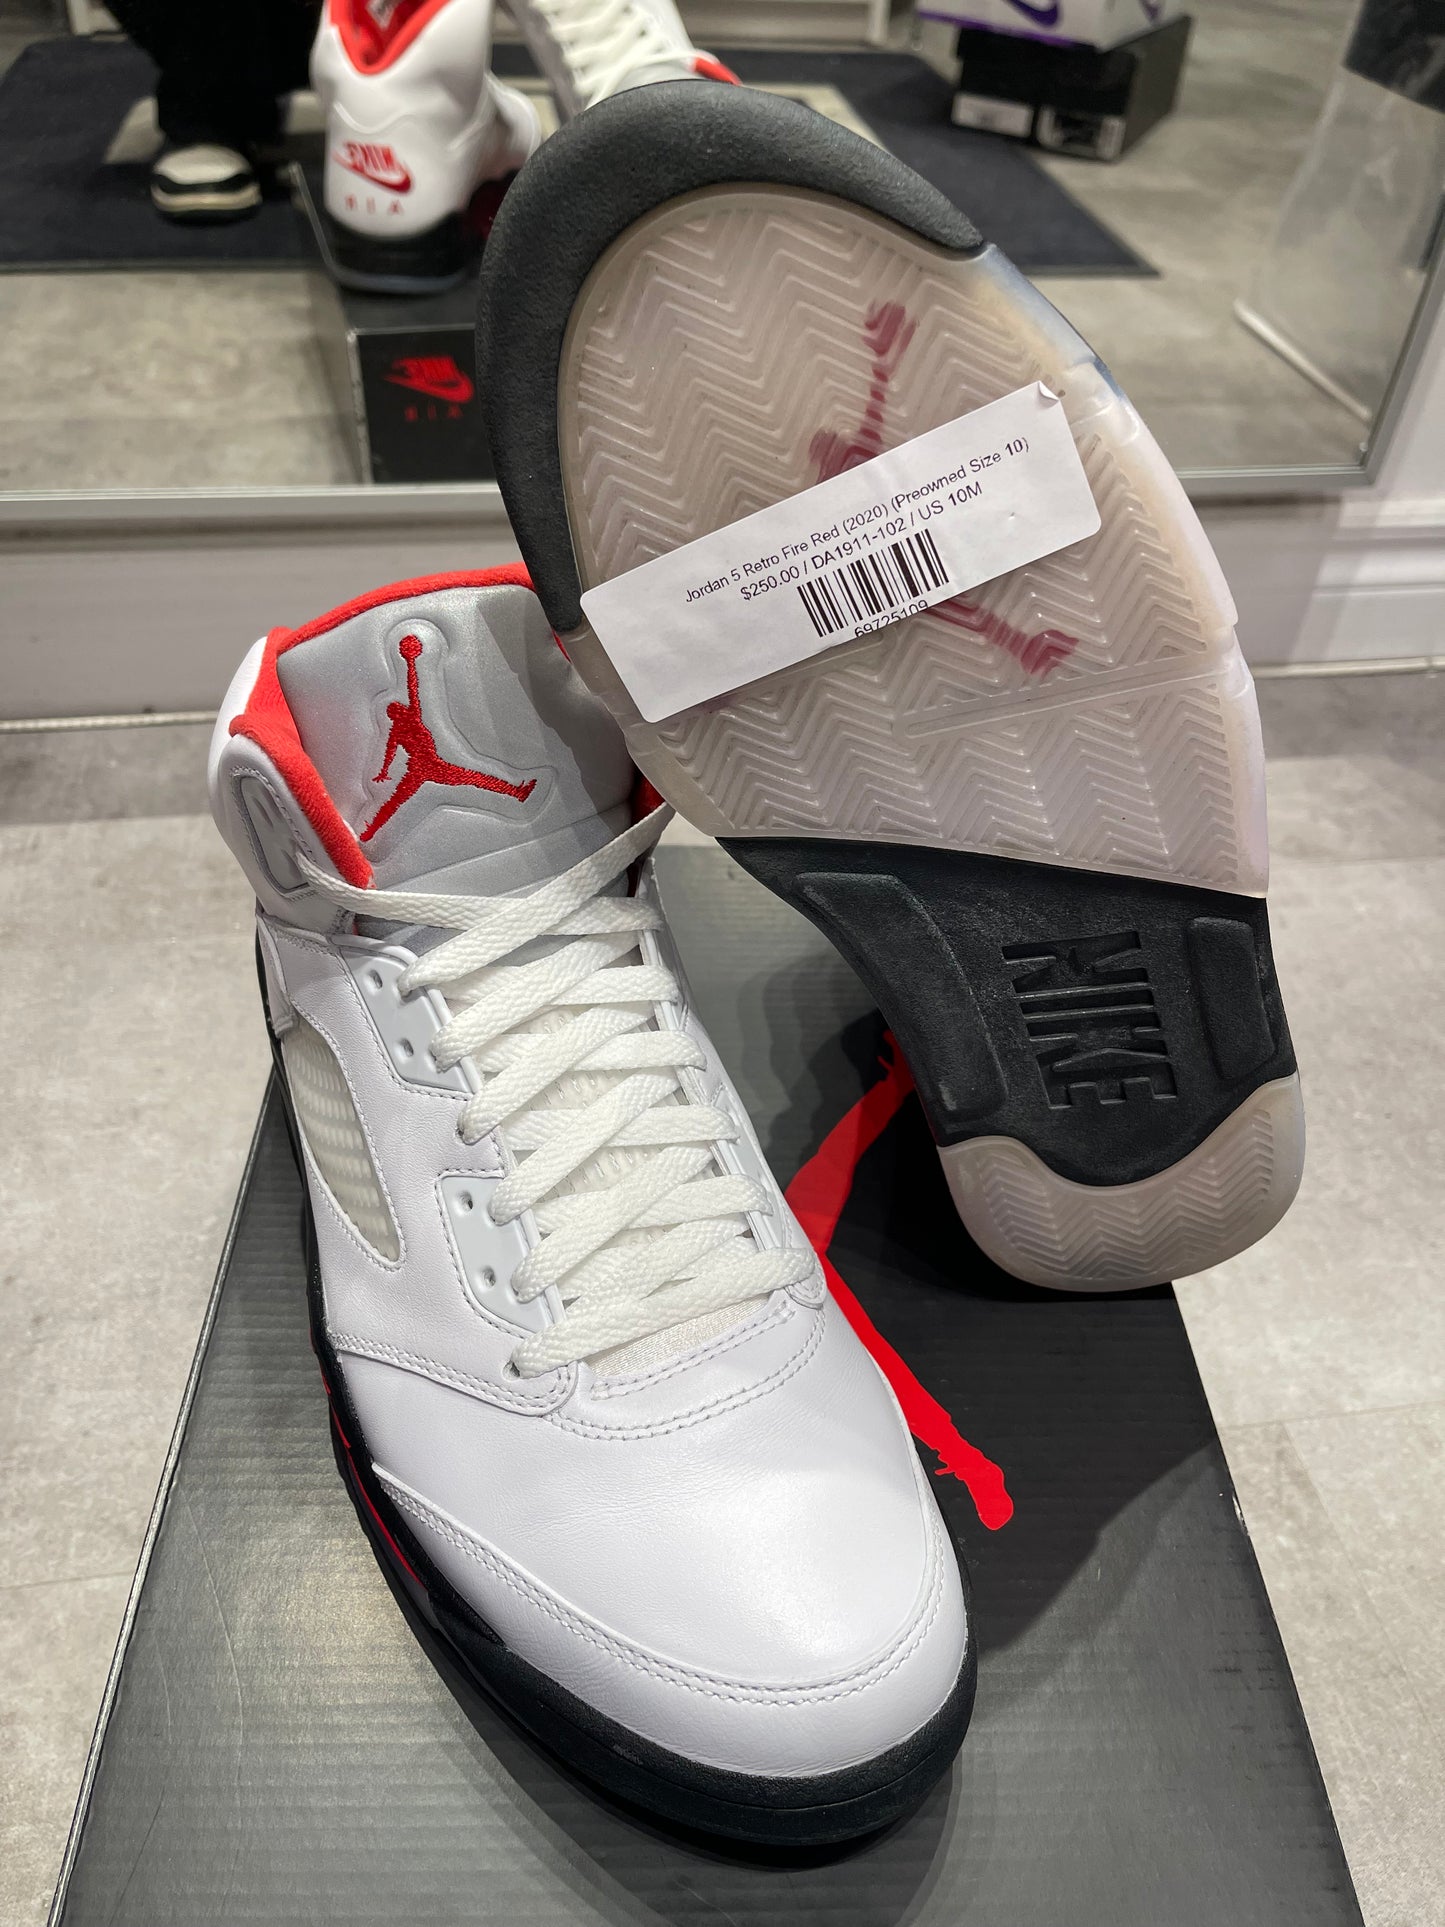 Jordan 5 Retro Fire Red (2020) (Preowned Size 10)